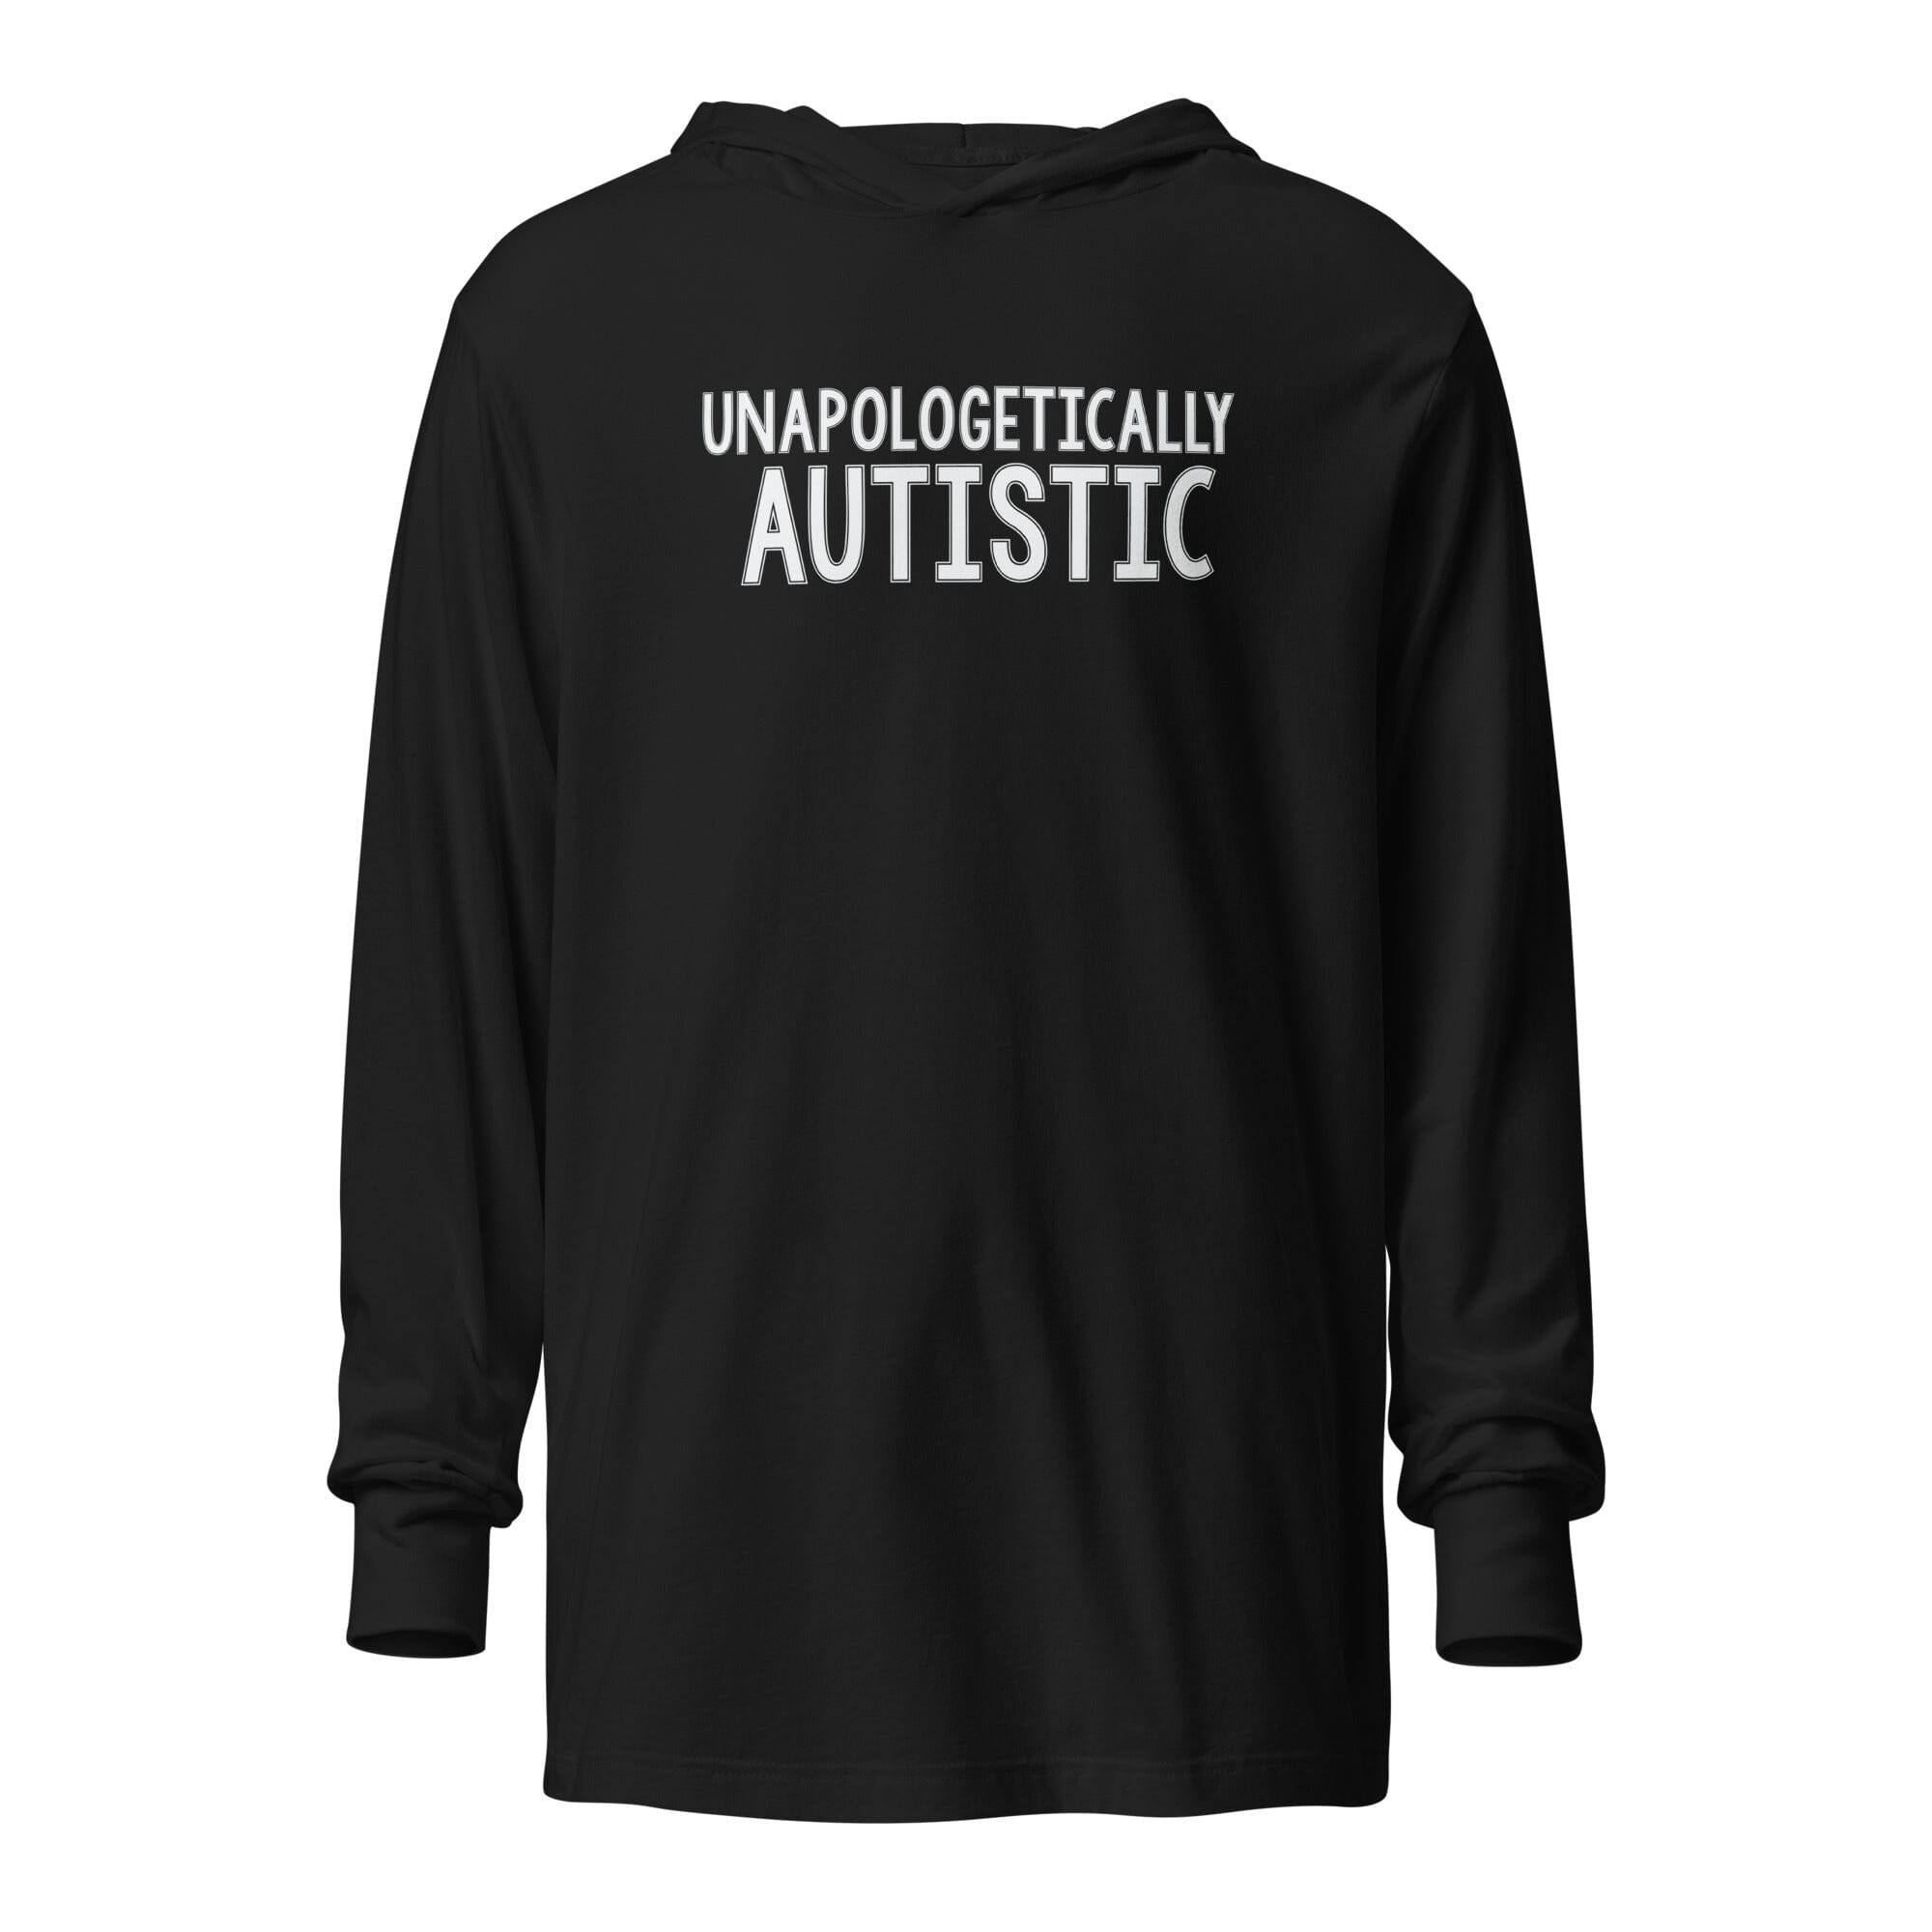 Unapologetically Autistic Unisex Hooded long-sleeve tee The Autistic Innovator Black XS 